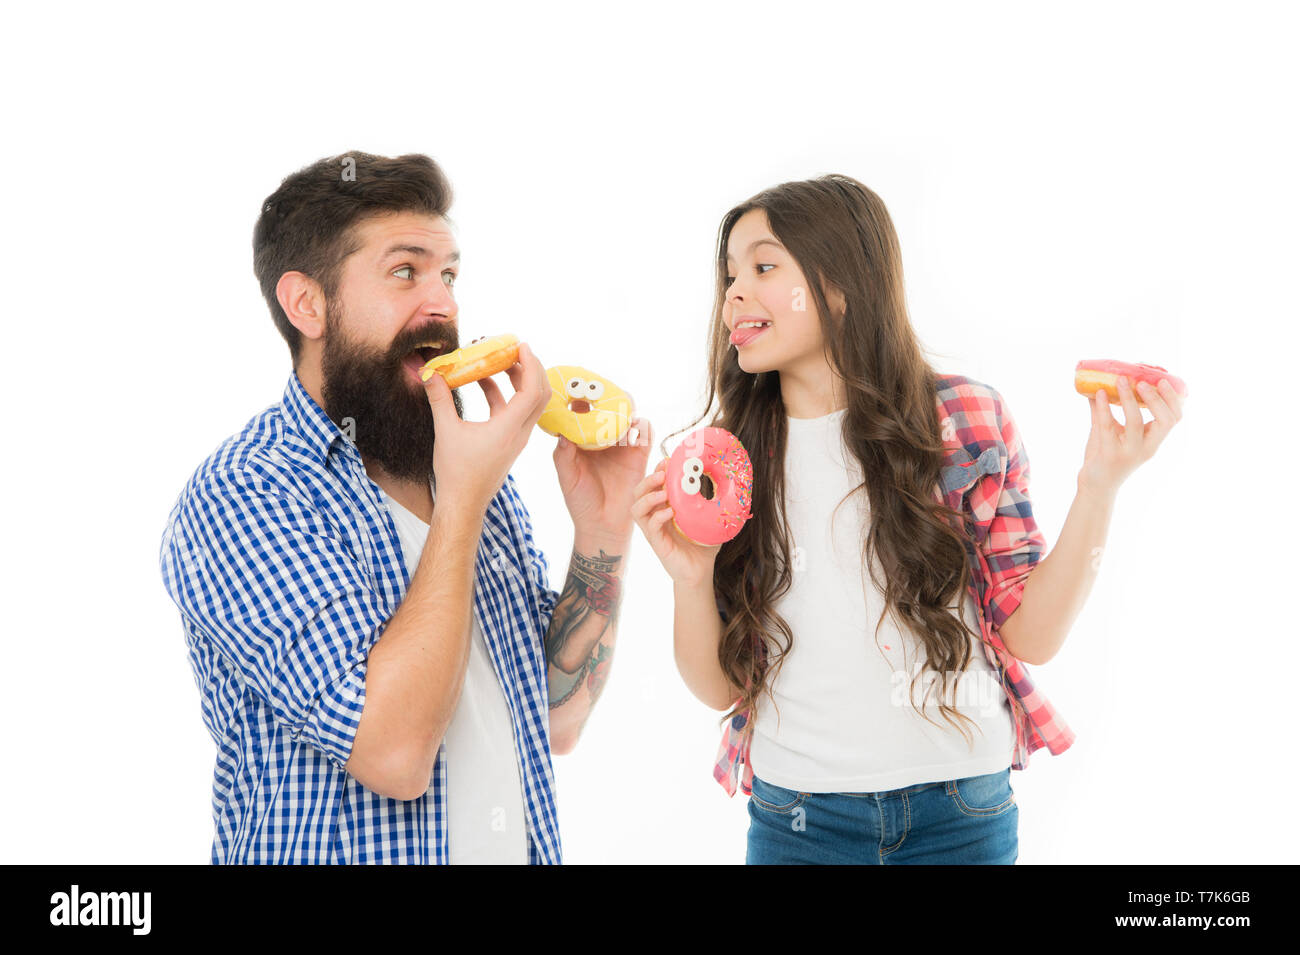 Perfect for dads with sweet tooth. Girl child and dad hold colorful glazed donuts. Sweets and treats concept. Daughter and father eat sweet donuts. Sweet dessert. We love donuts. Fathers day present. Stock Photo